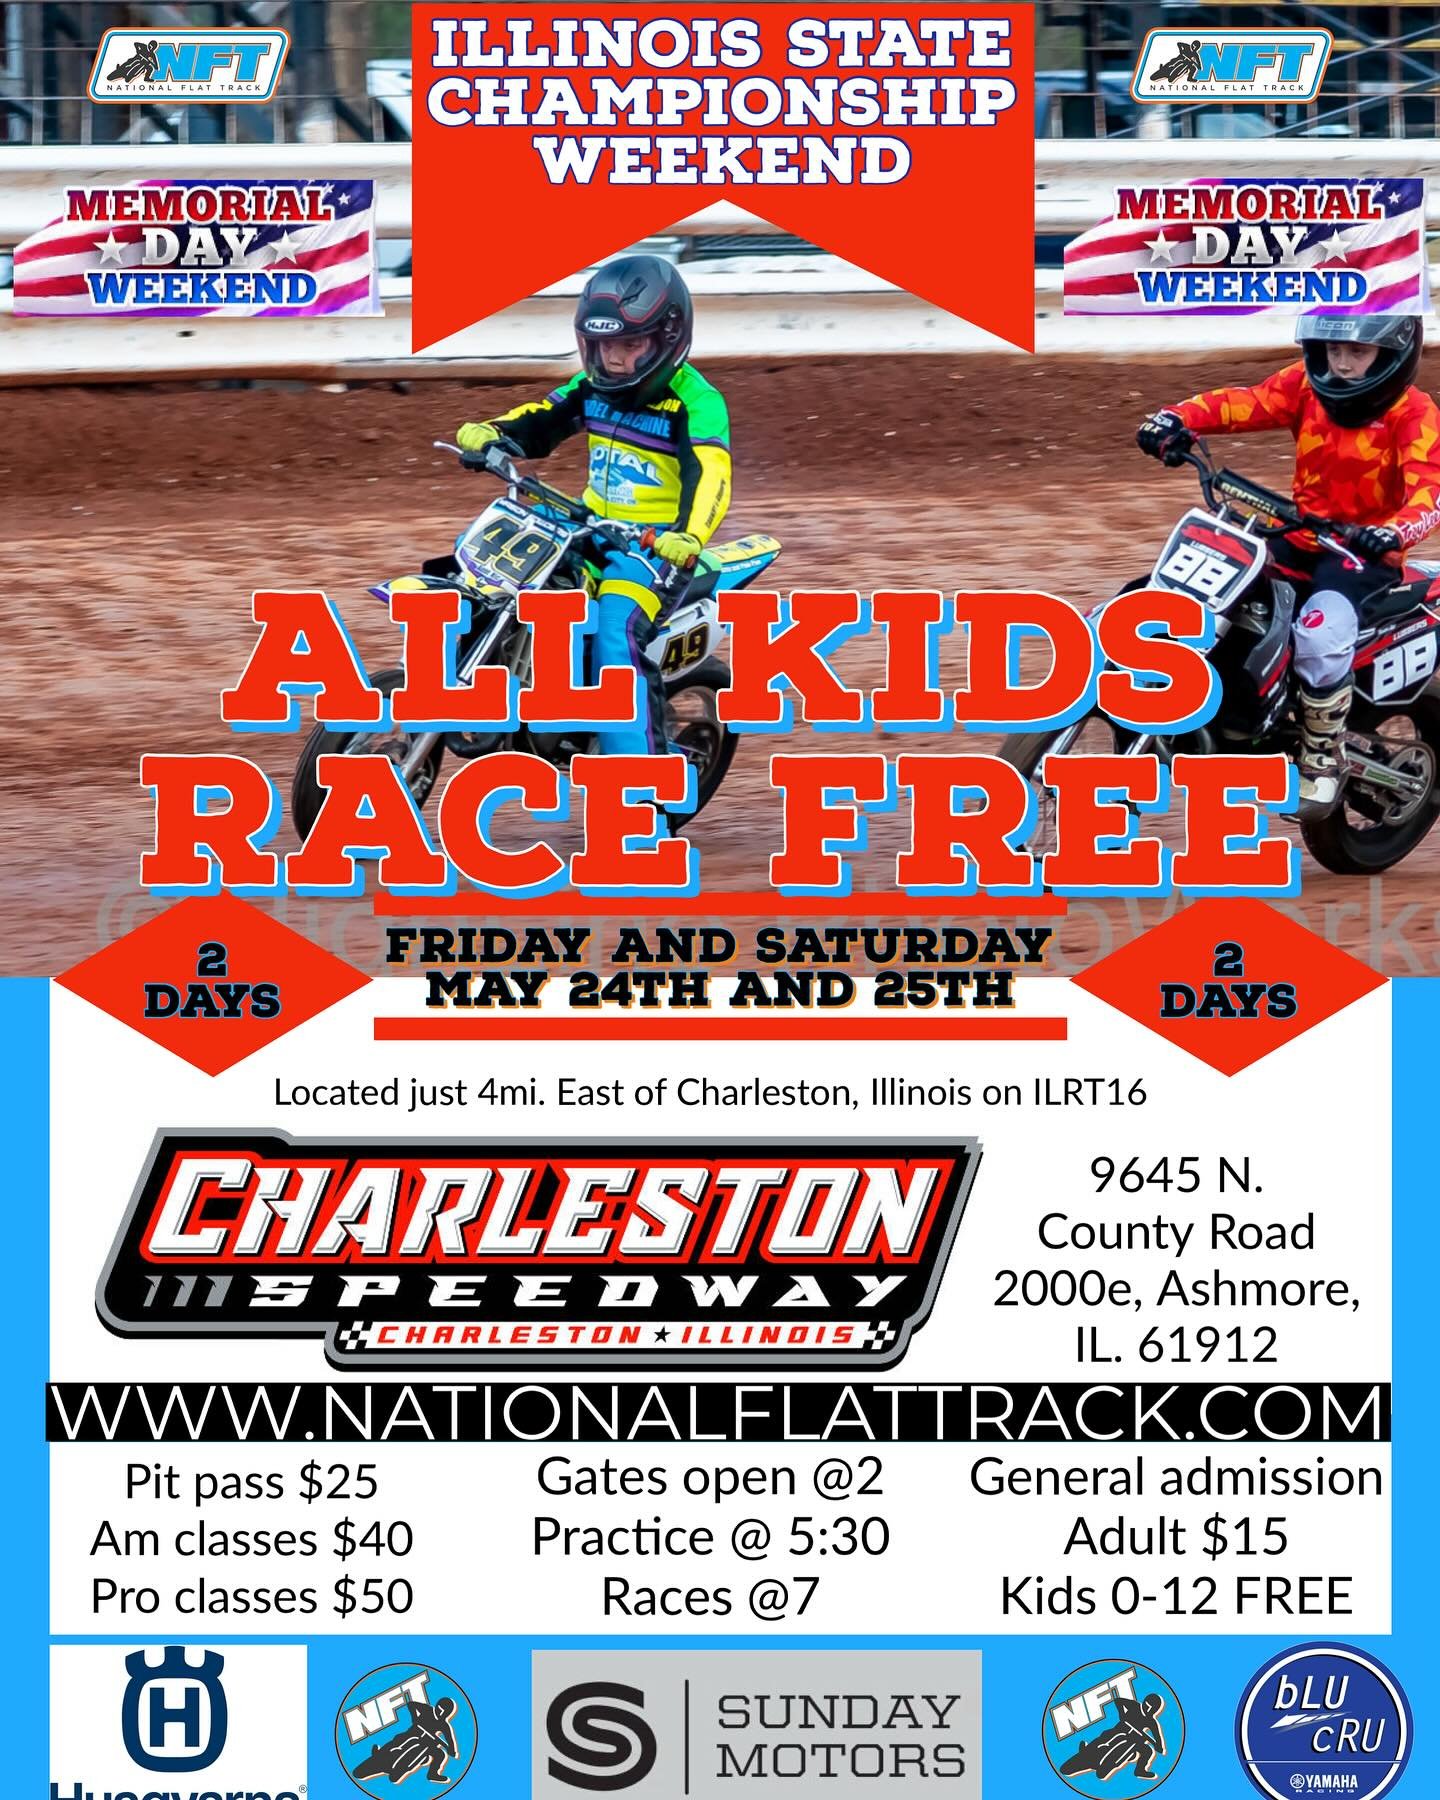 **FREE*FREE**FREE*FREE**FREE**🏁

Things keep getting better for the NFT Illinois State Championship race weekend Friday and Saturday night under the lights on the 3/8 MILE track May 24th and 25th. Charleston Speedway just stepped up to sponsor ALL K